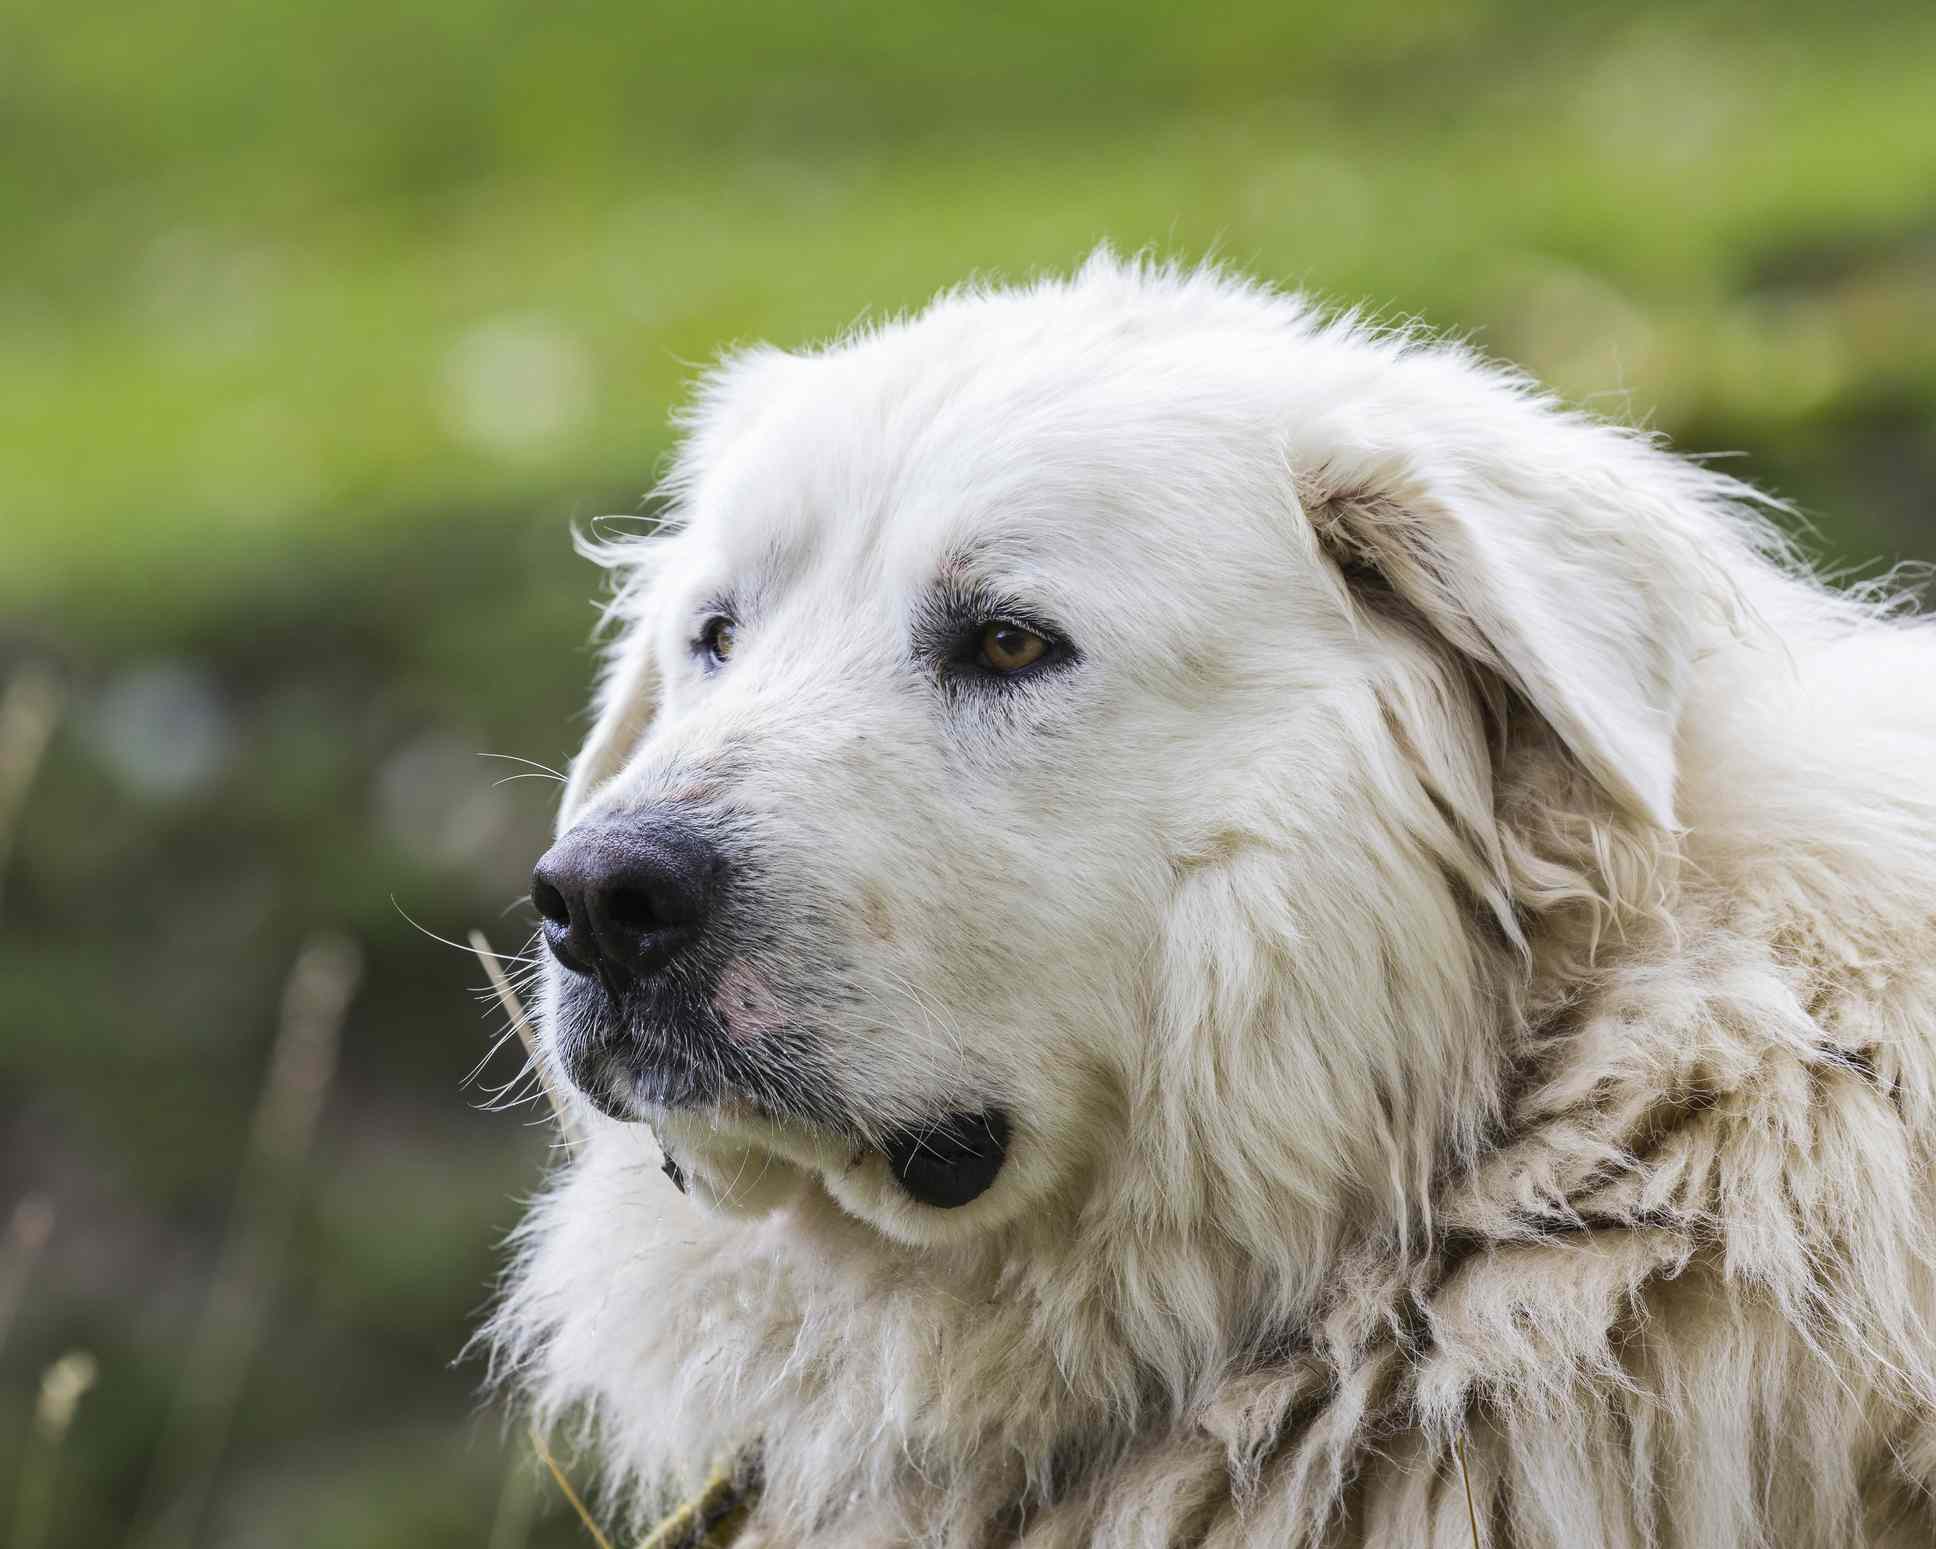 Great Pyrenees headshot against blurred green background